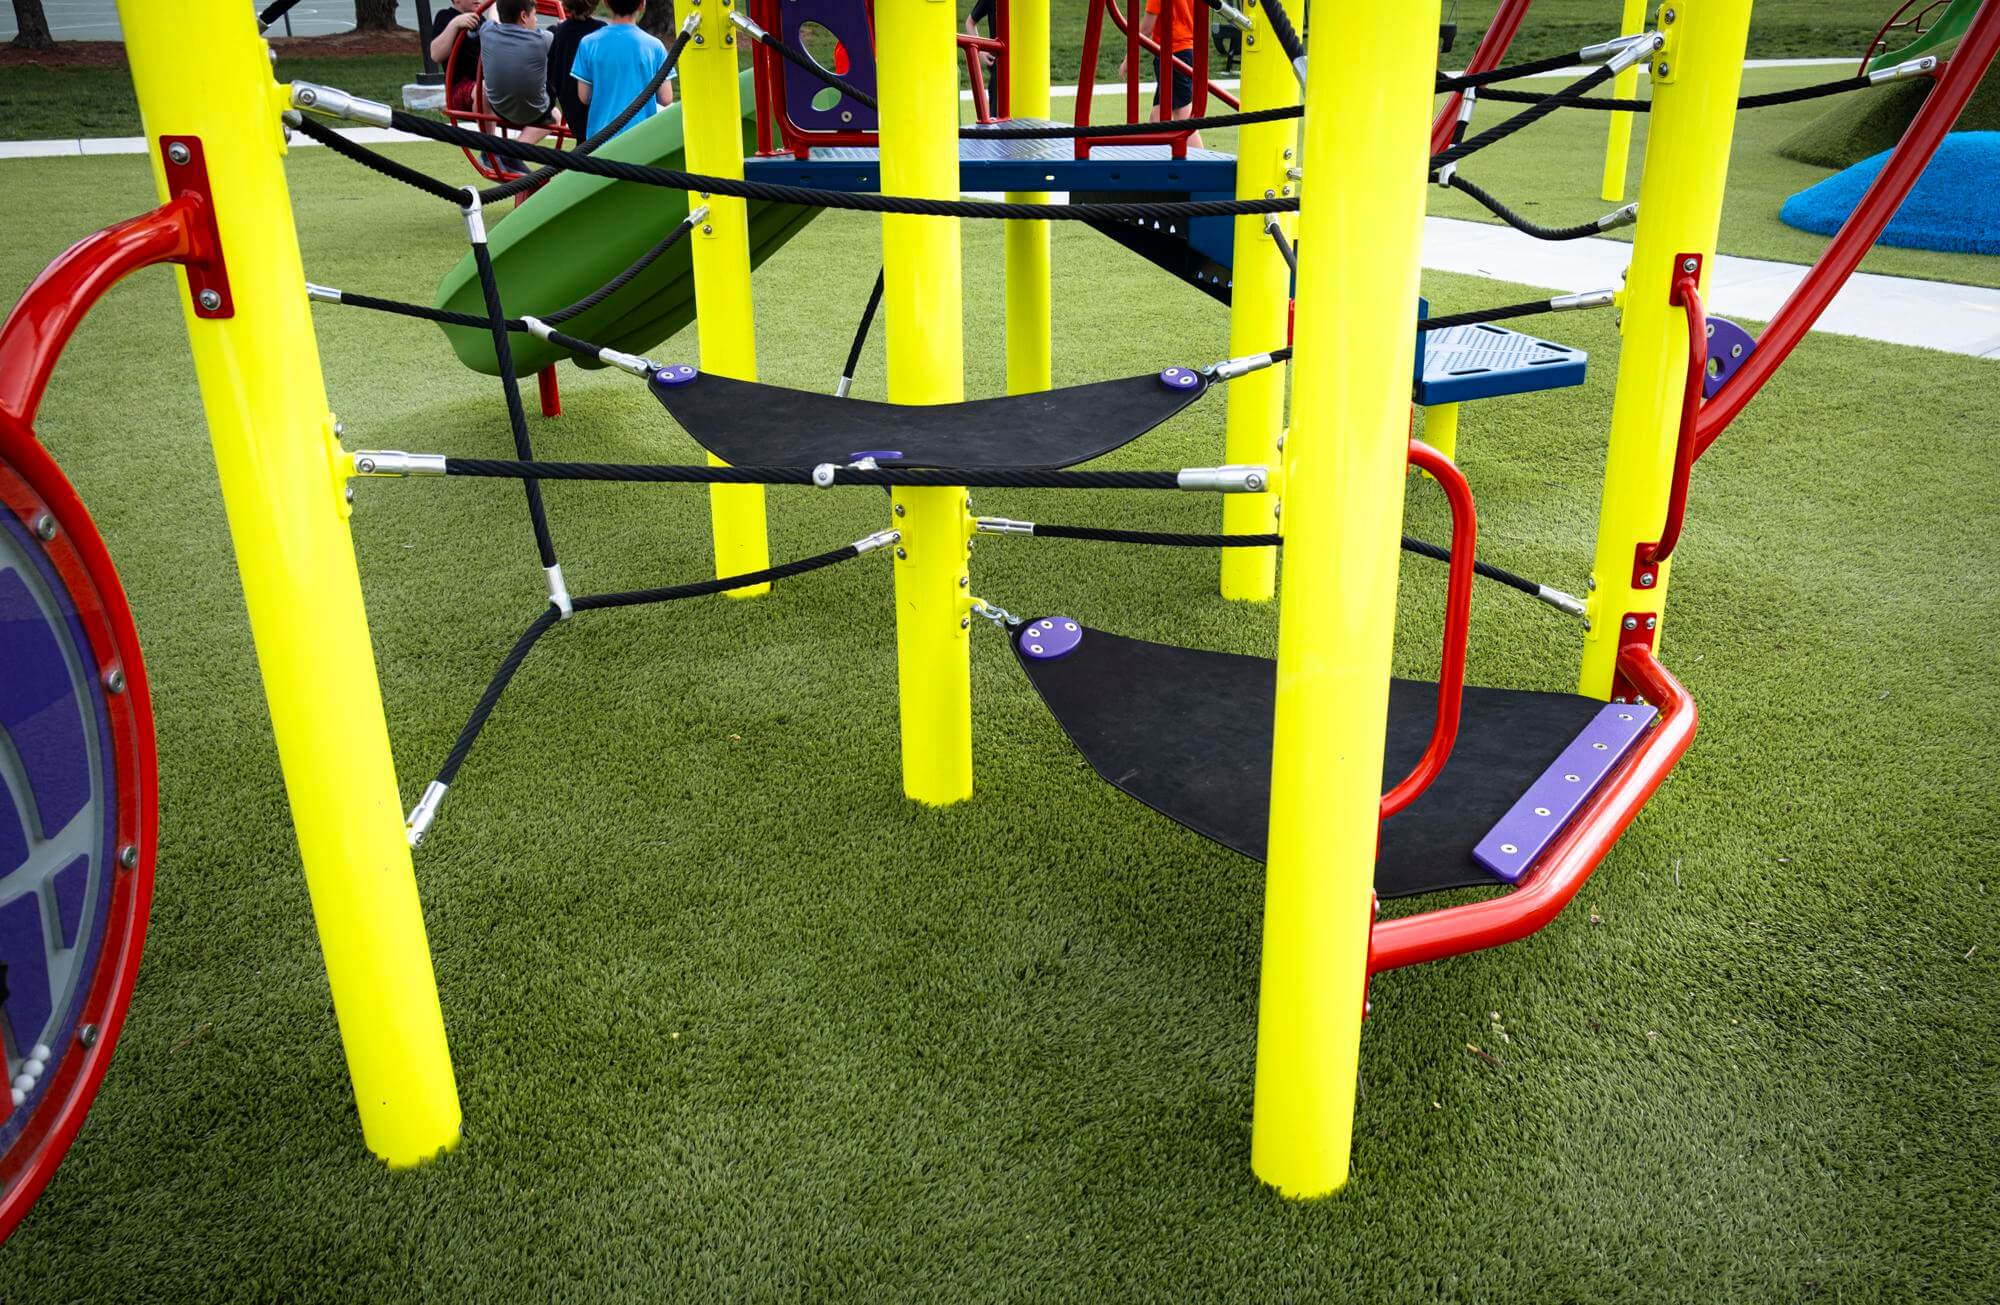 Close up shot of colorful playground equipment on vibrant green turf.